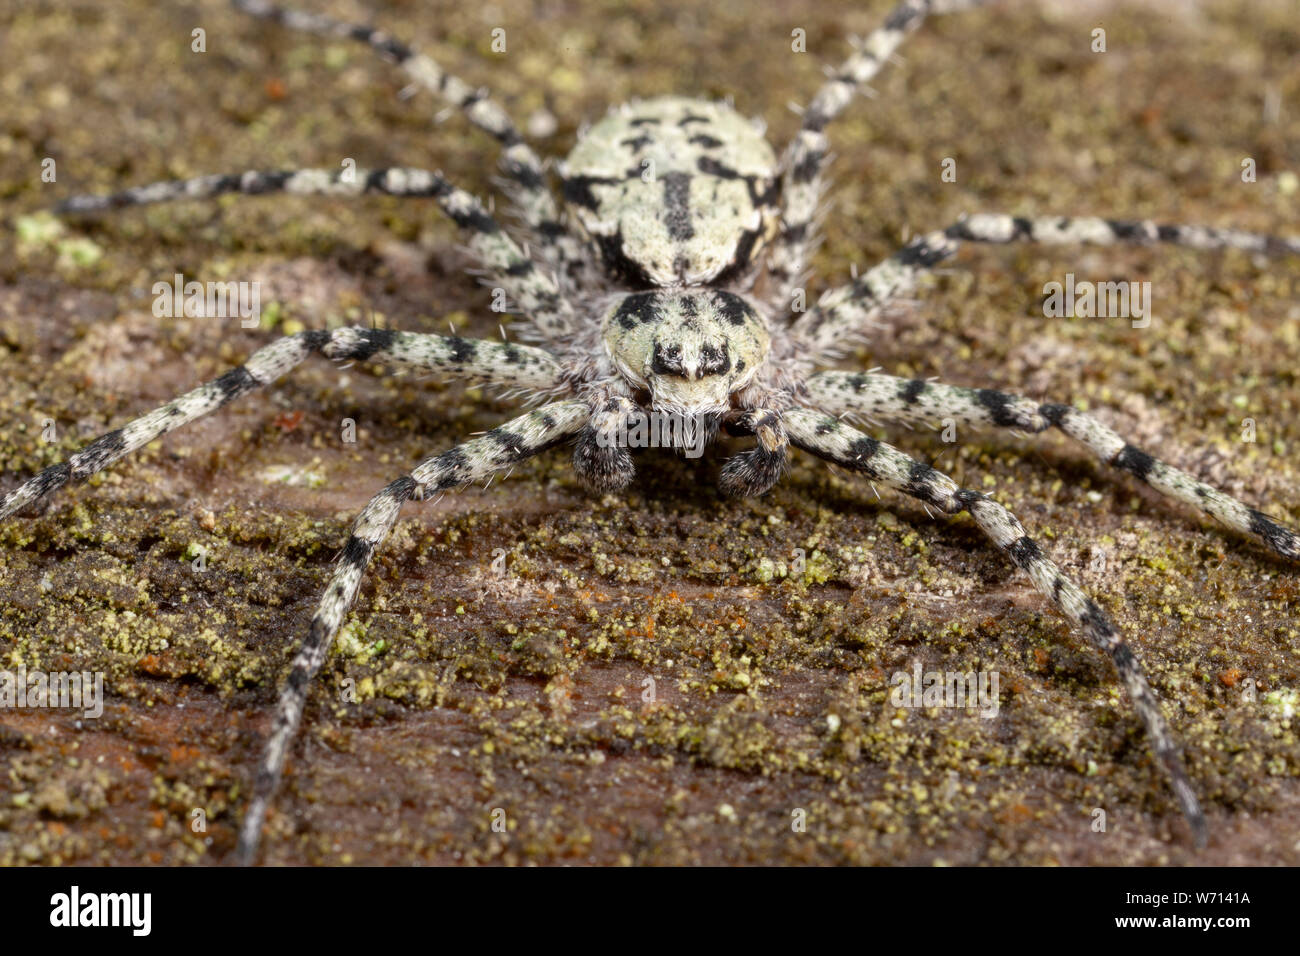 Beautiful spider photographed very close Stock Photo